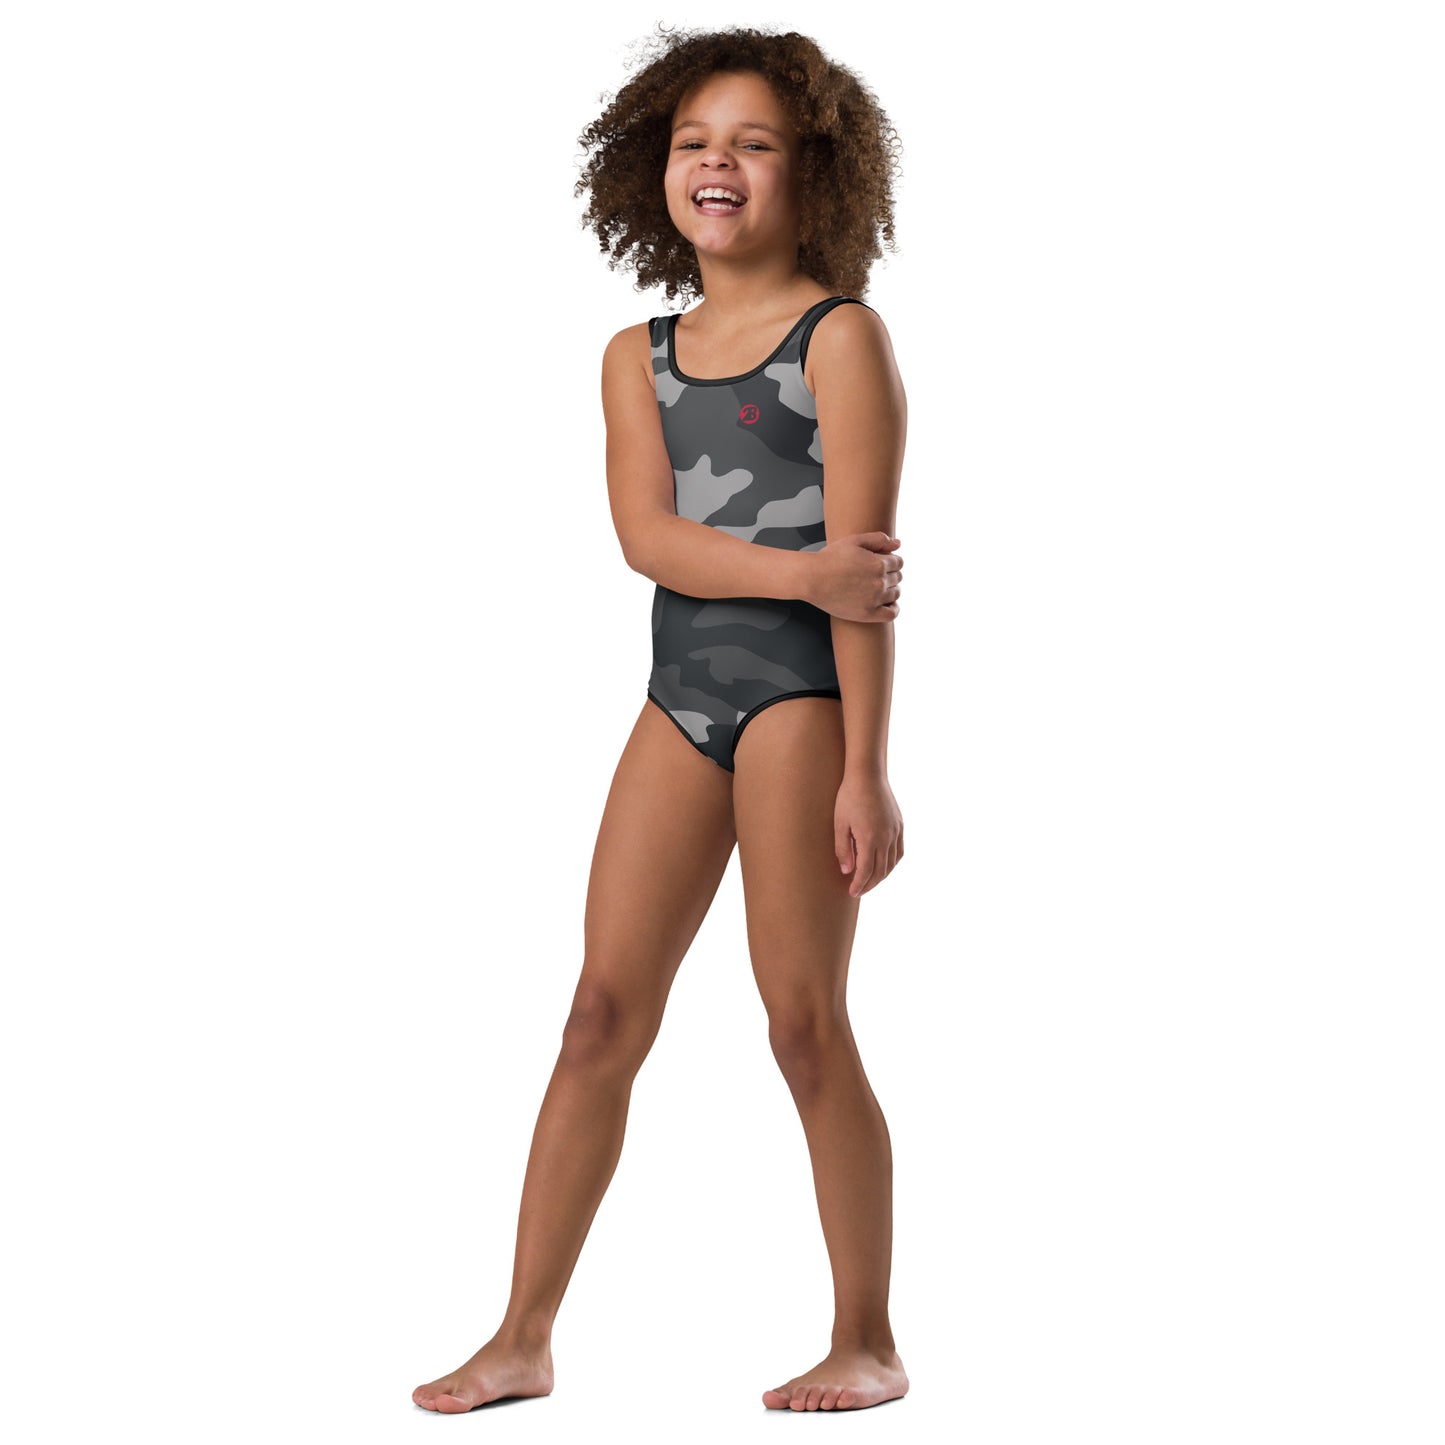 2Bdiscontinued. kid's one-piece swimsuit grycmo